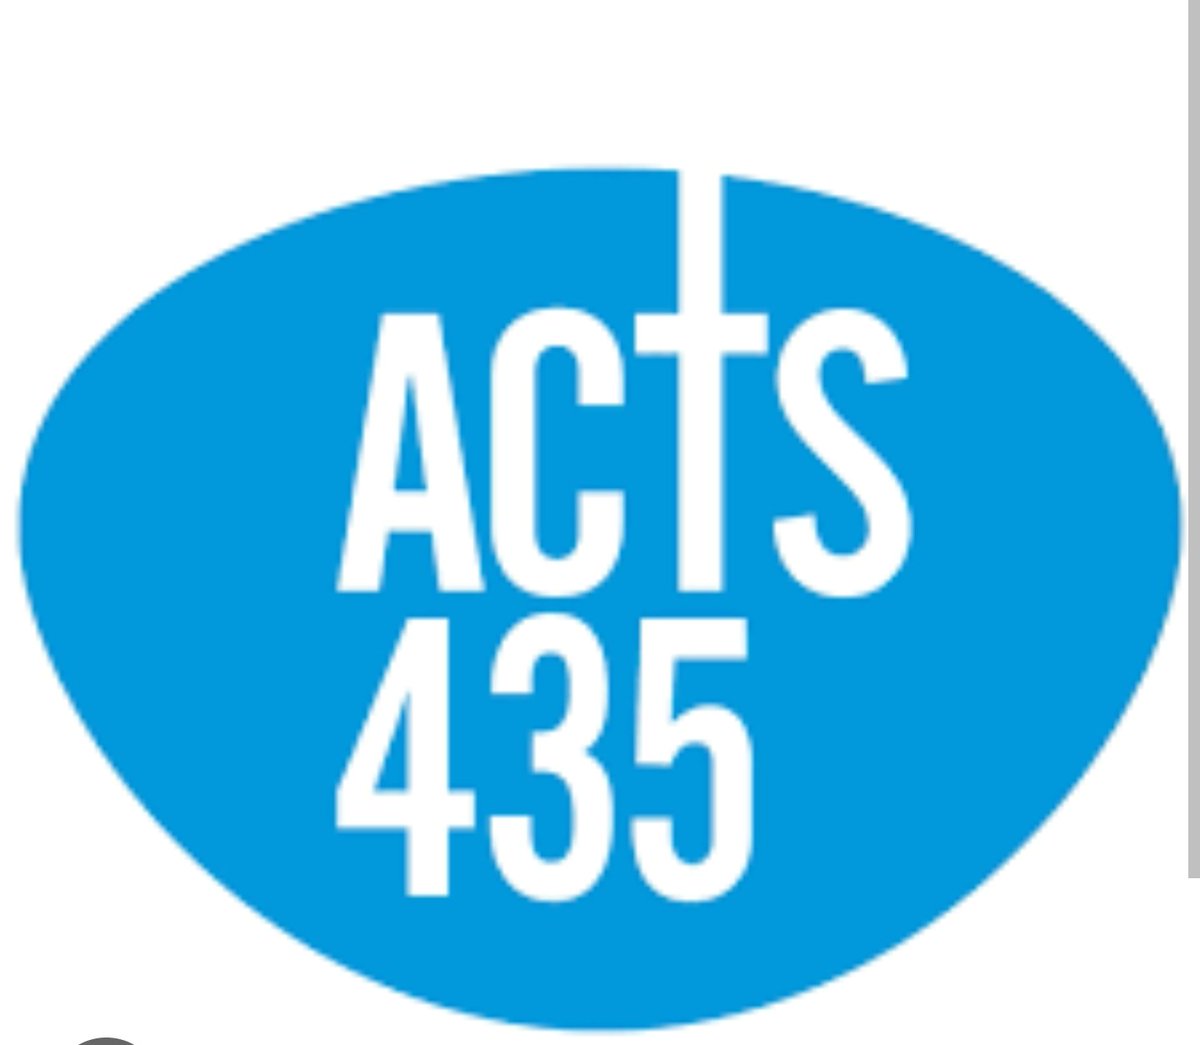 Many thanks to Acts435 for providing financial support, helping a family in desperate need to keep the roof over their head and prevent them from being evicted @acts435